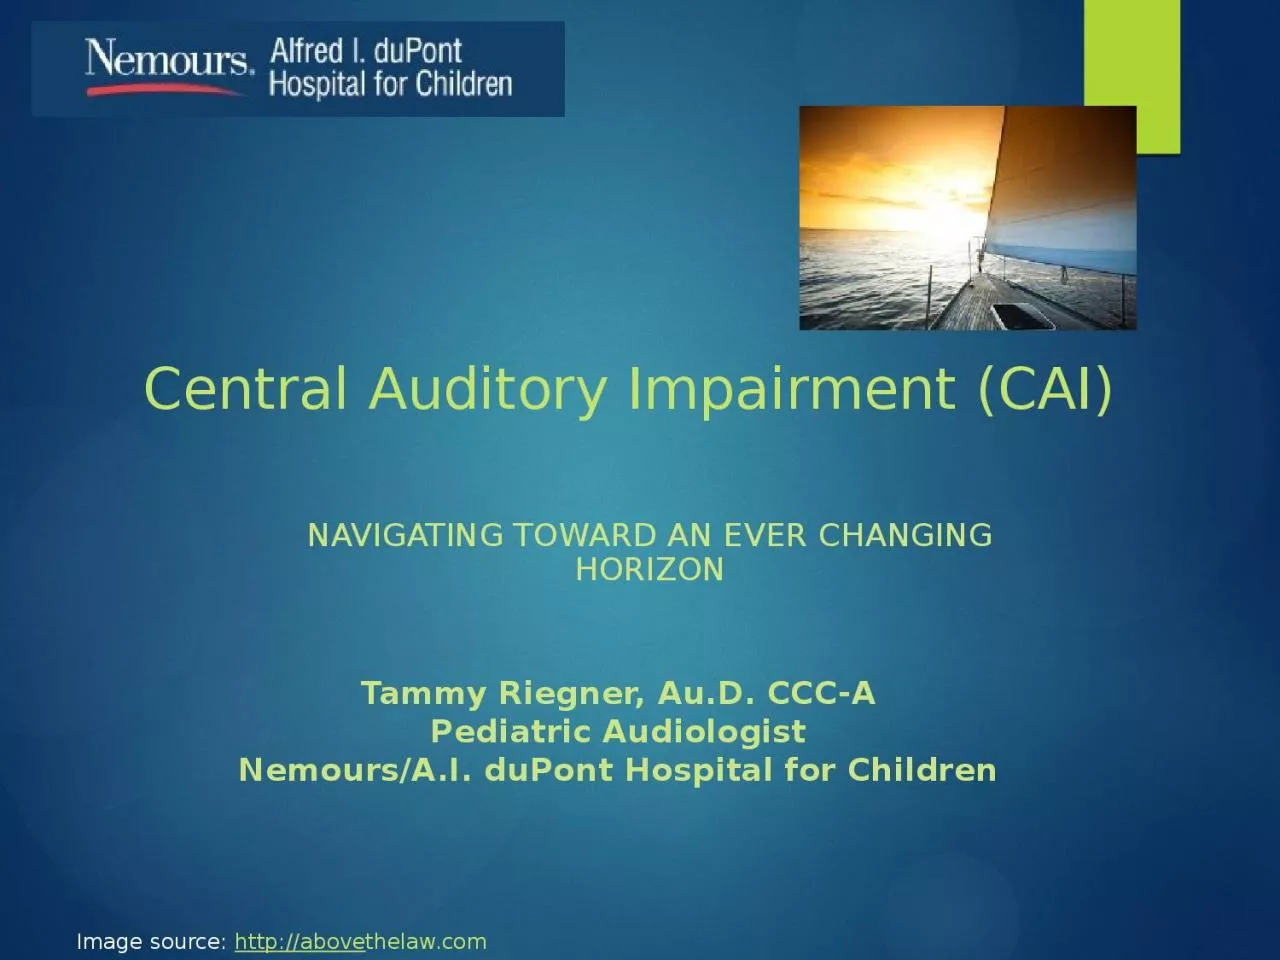 Central Auditory Impairment (CAI)